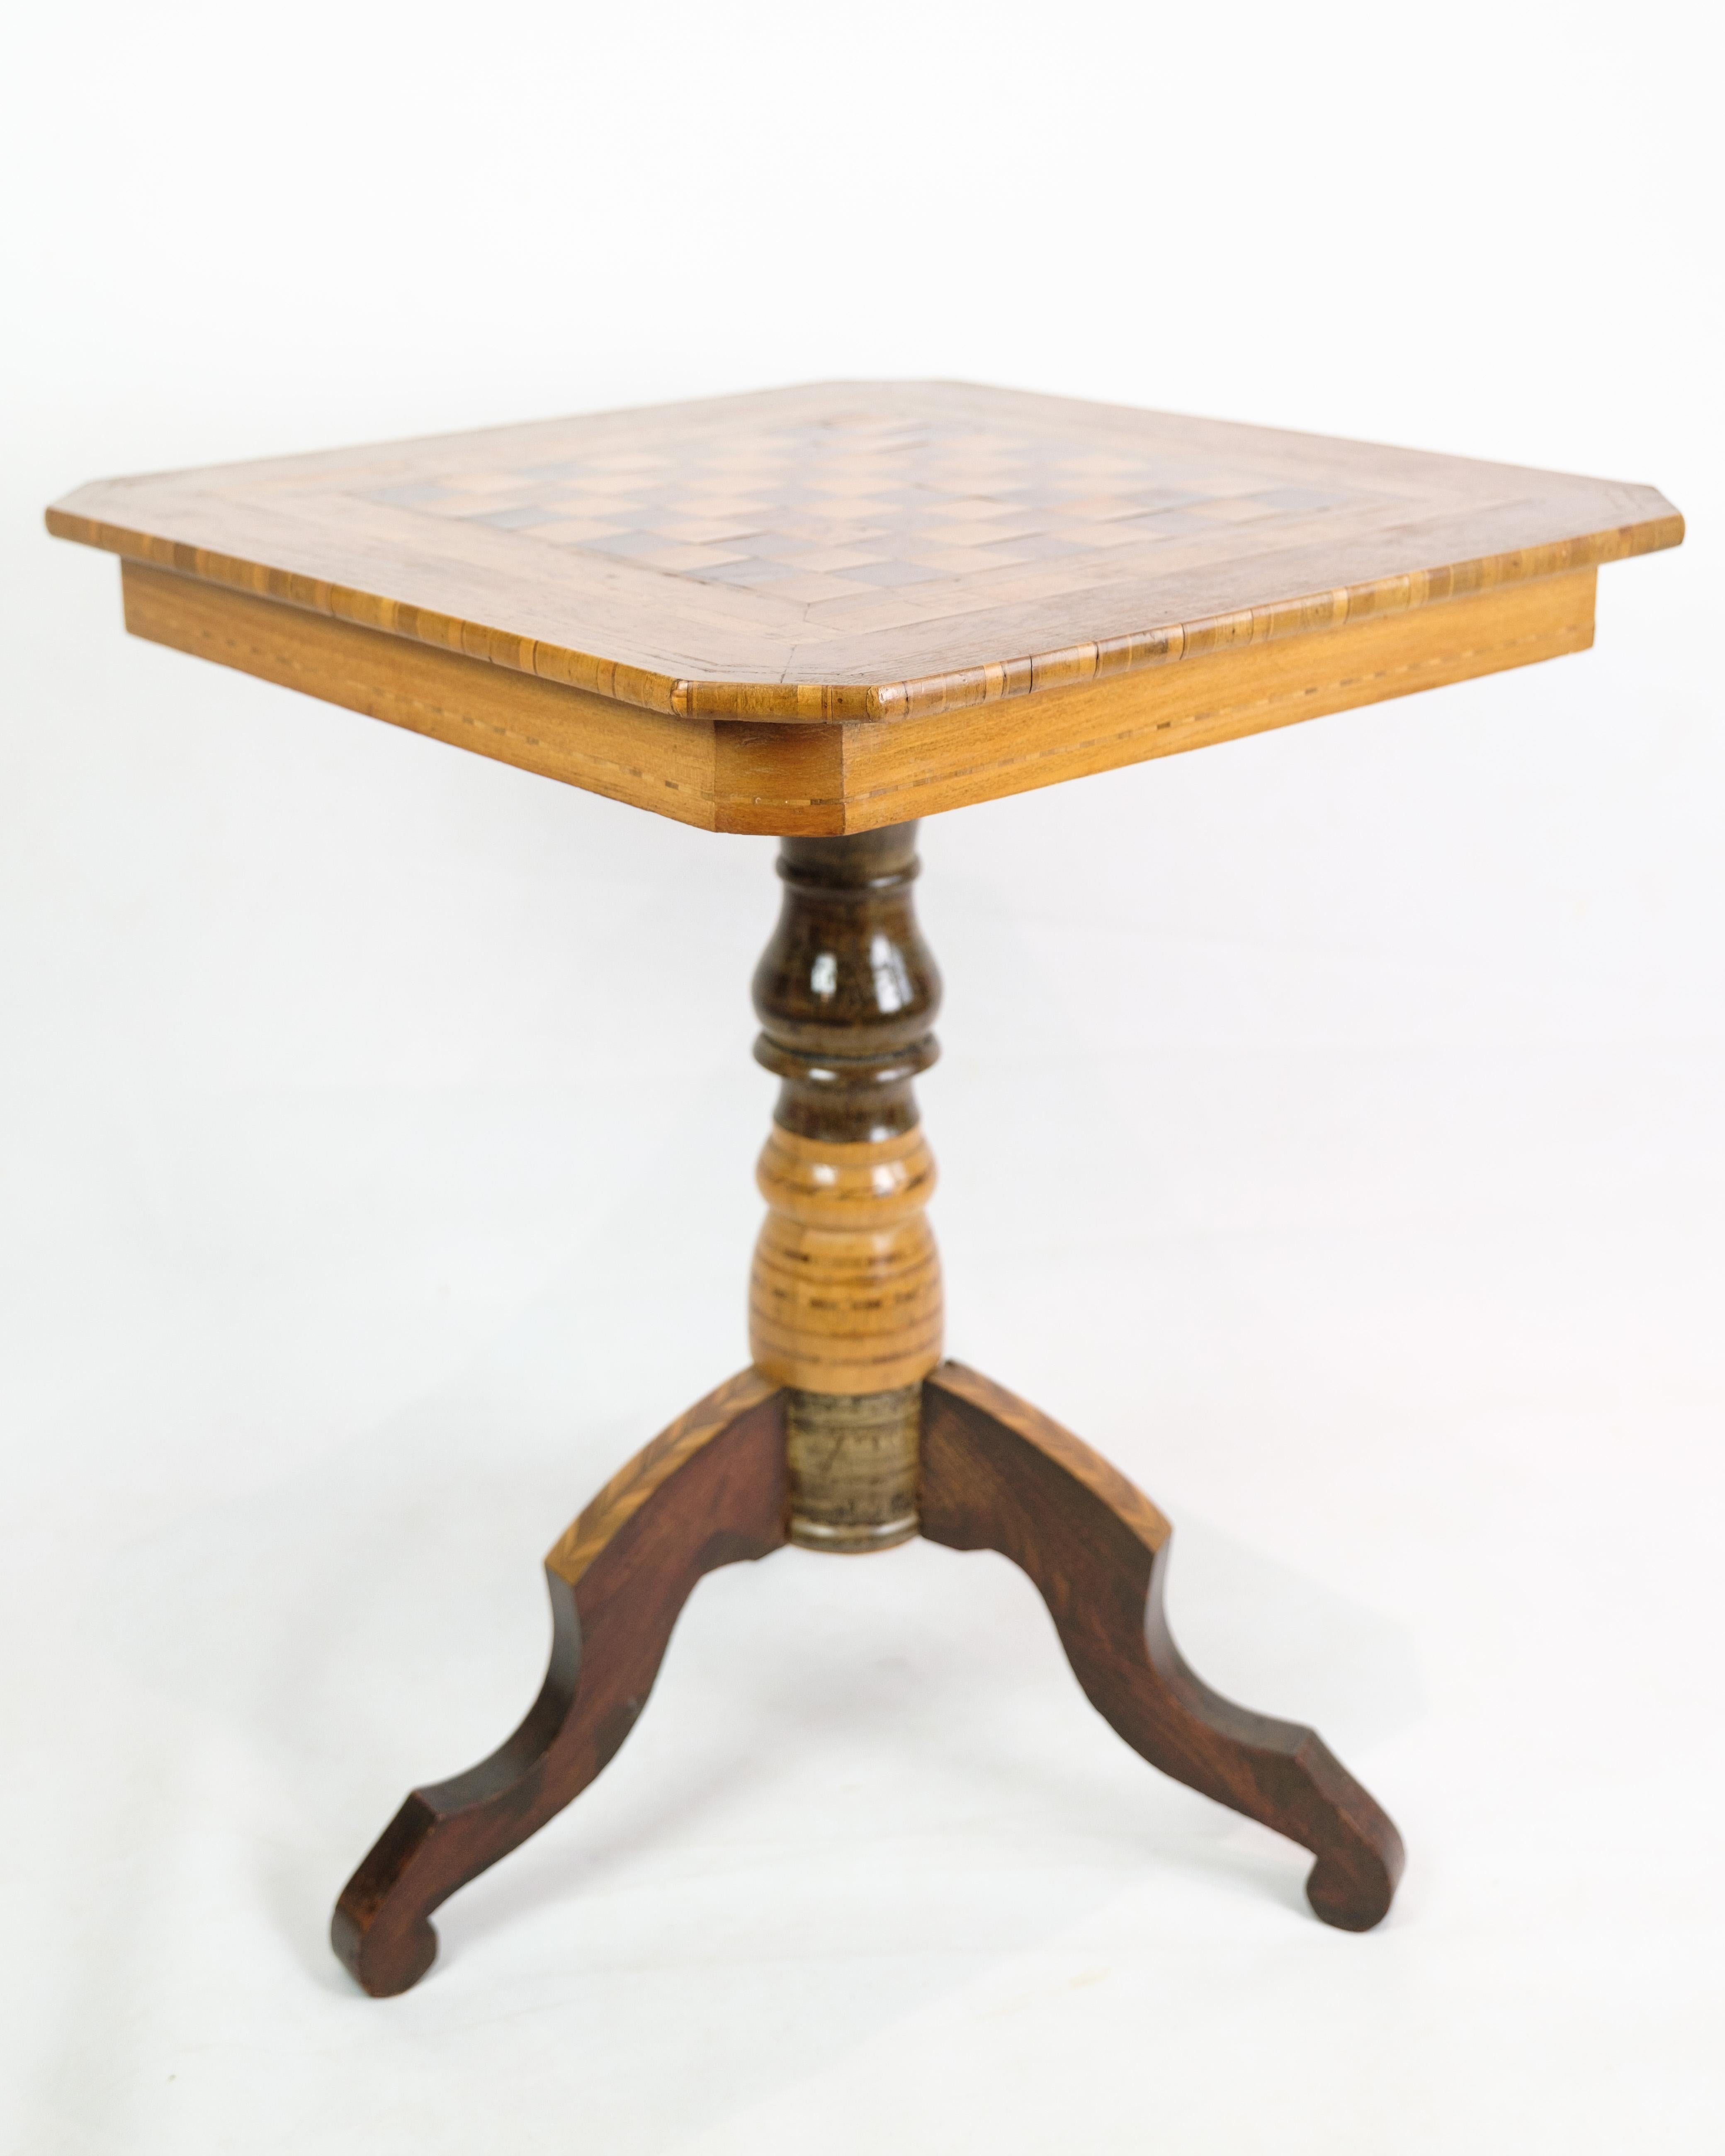 The Italian chess table, created around the 1860s, is a magnificent representation of traditional craftsmanship and artistic skill. It is richly decorated with various intarsia of fruit wood carefully inlaid to create beautiful patterns and designs